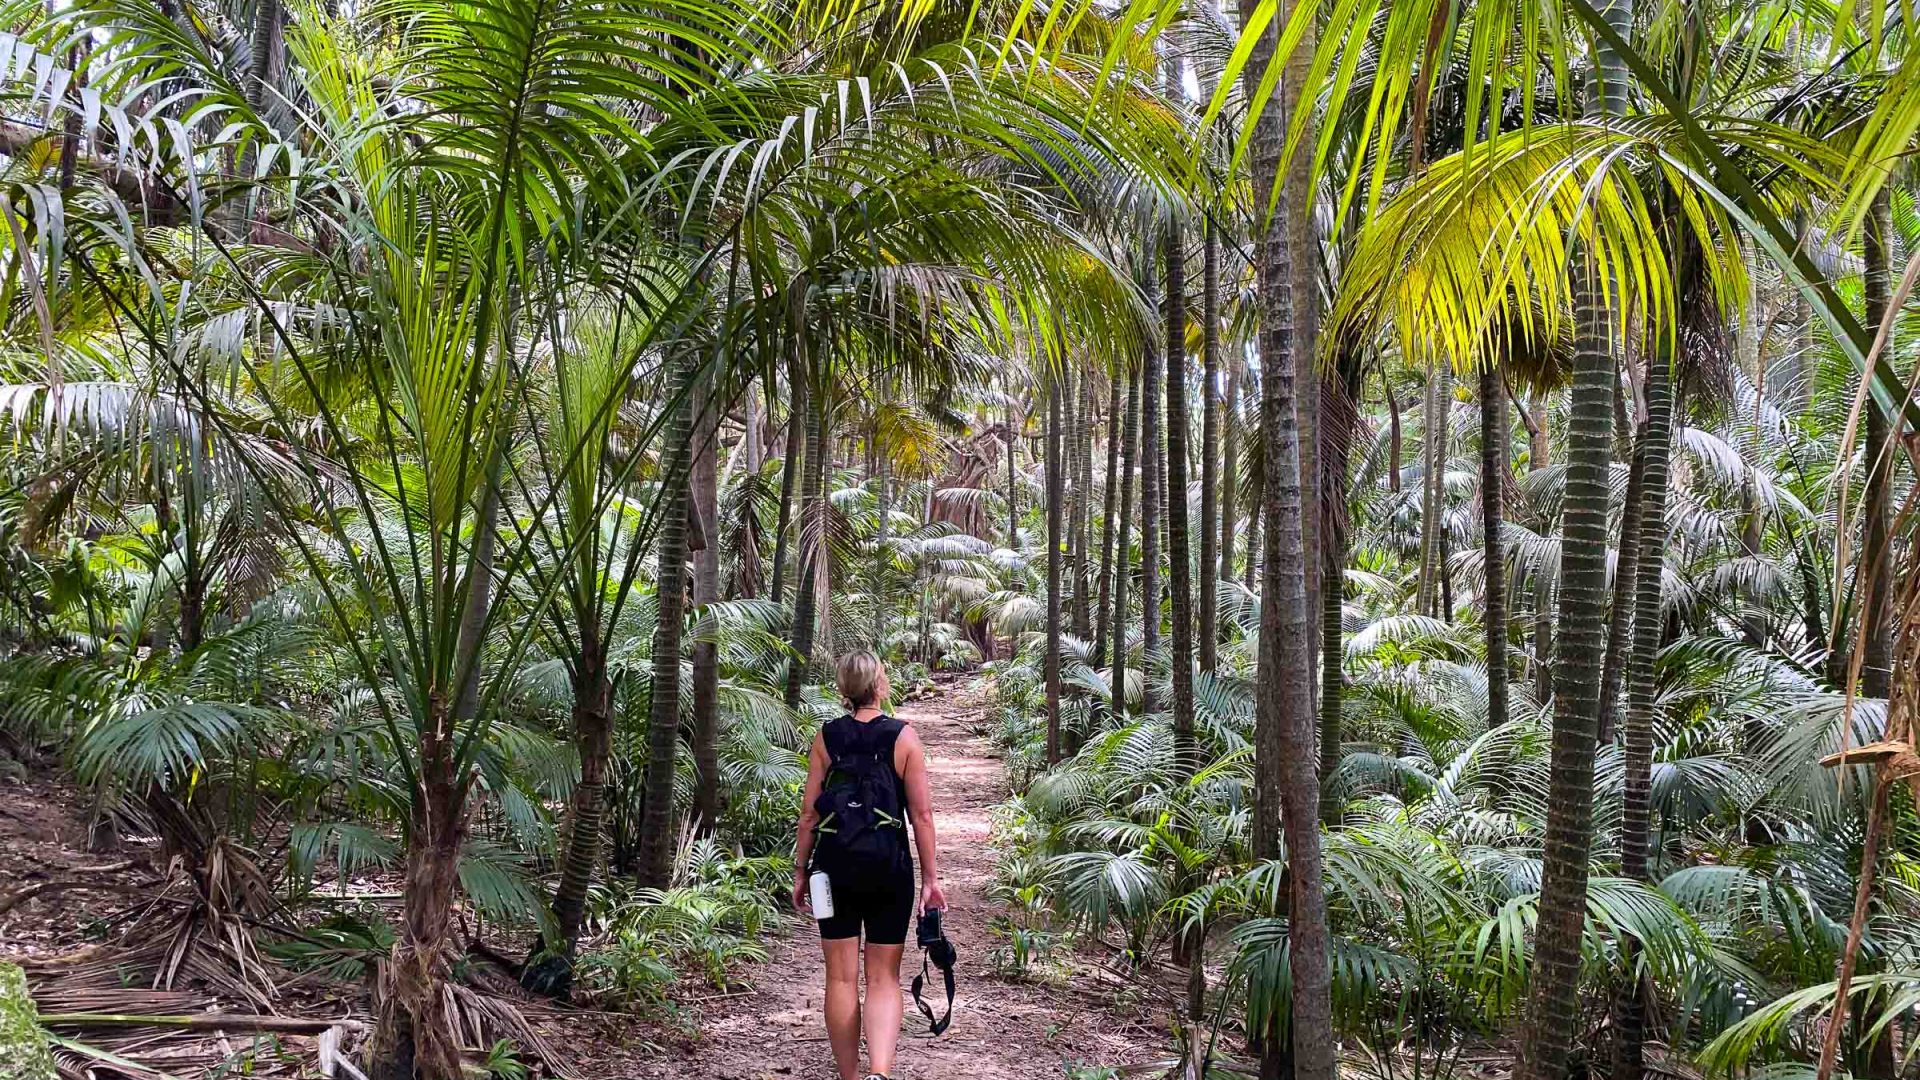 The back of a woman as she walks through forest.